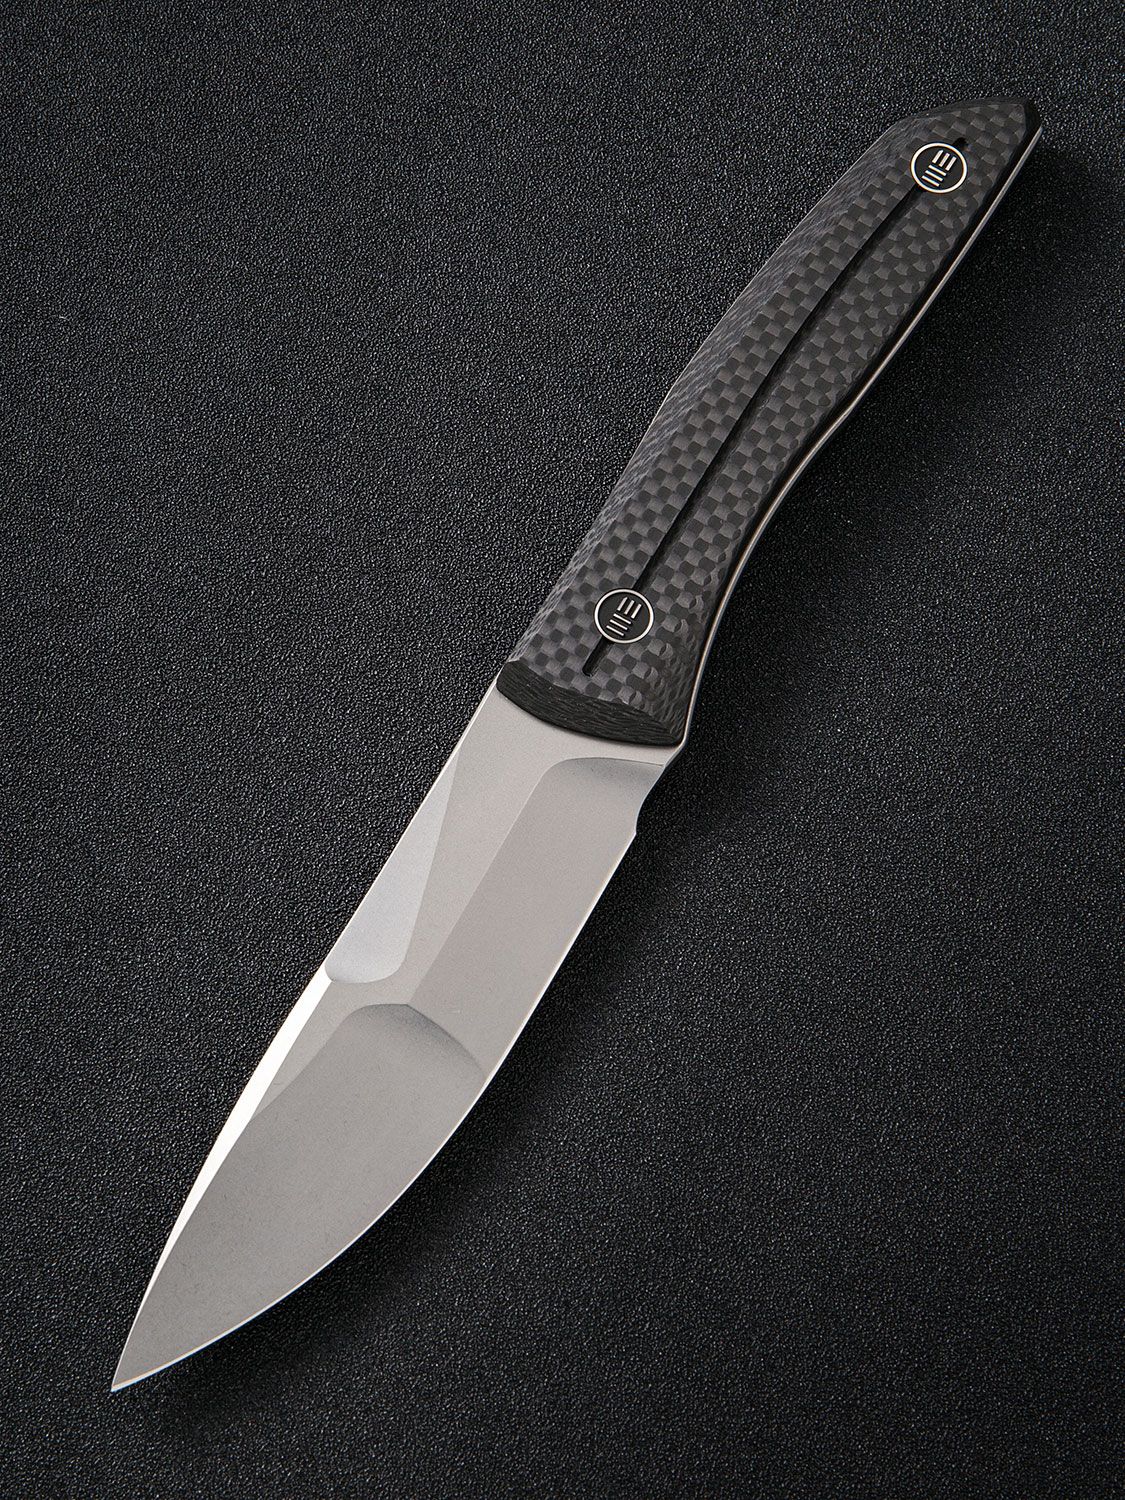 WE Knife Co. Scoppio Review